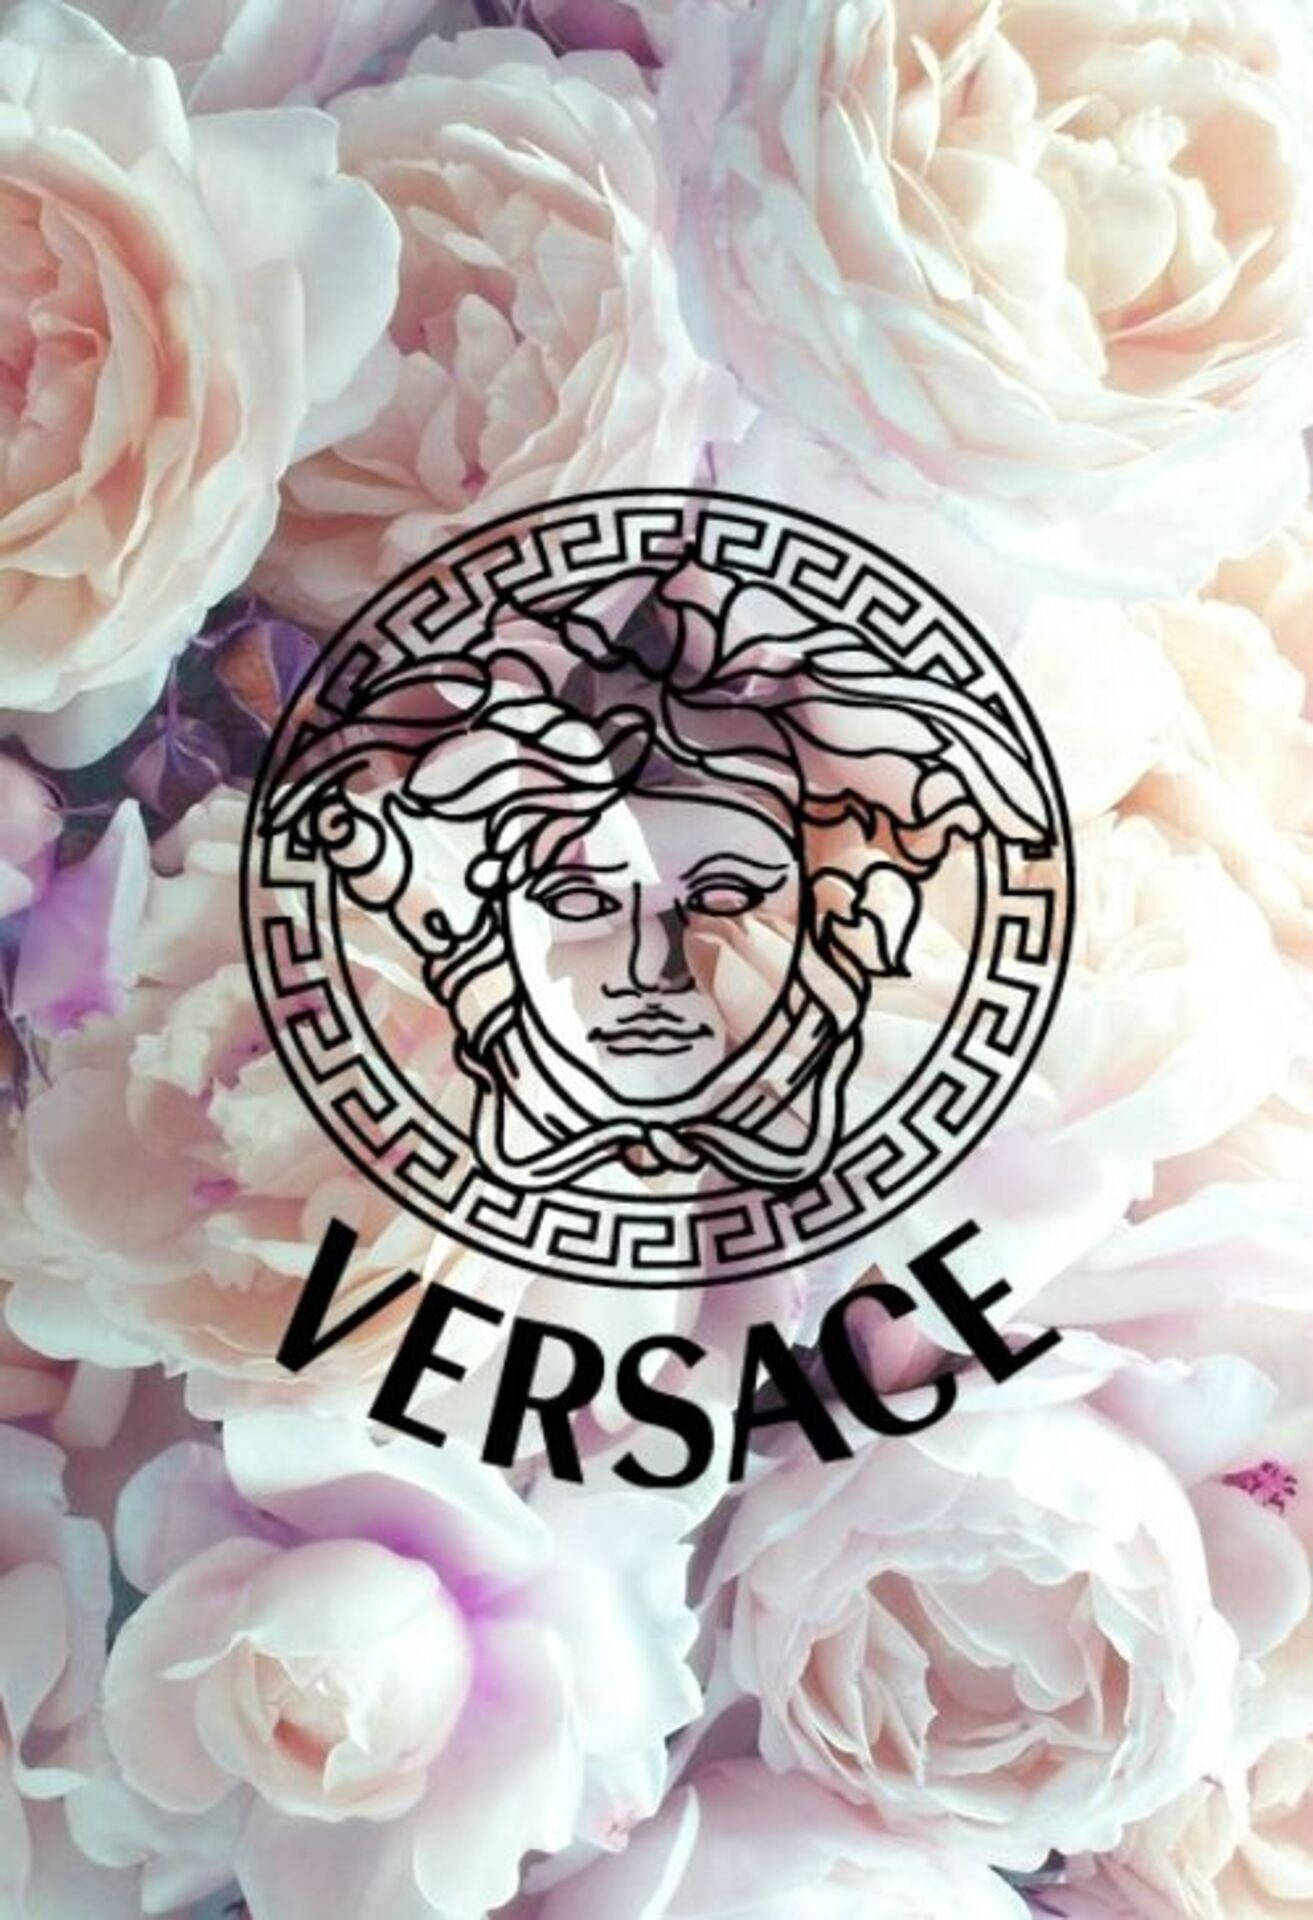 Versace's Pink Rose Look For A Fashionable Vibe